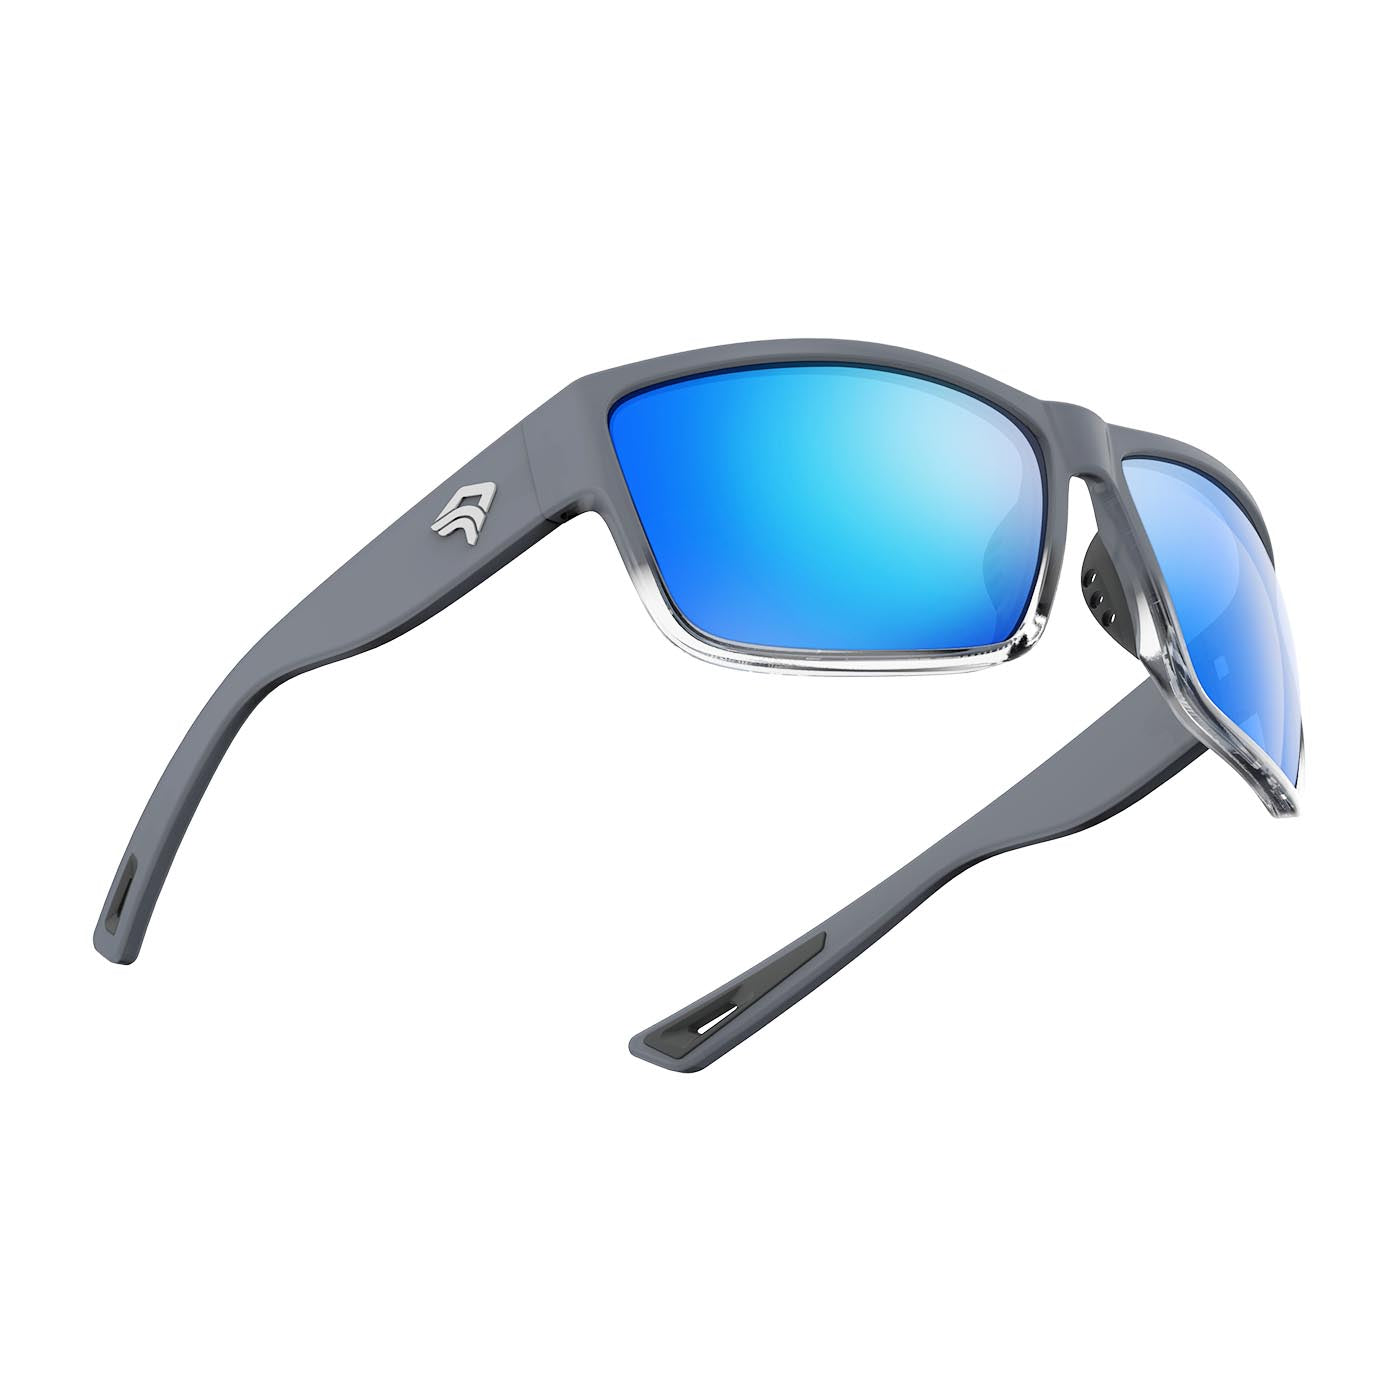 Pure Polarized Sports Sunglasses Ideal and Lifetime - Cycling, for Golf, Women with - Men and Ideal Transparent Matte Flexible - Frame Warranty and - for Adjustable Grey Running, Half To Fishing